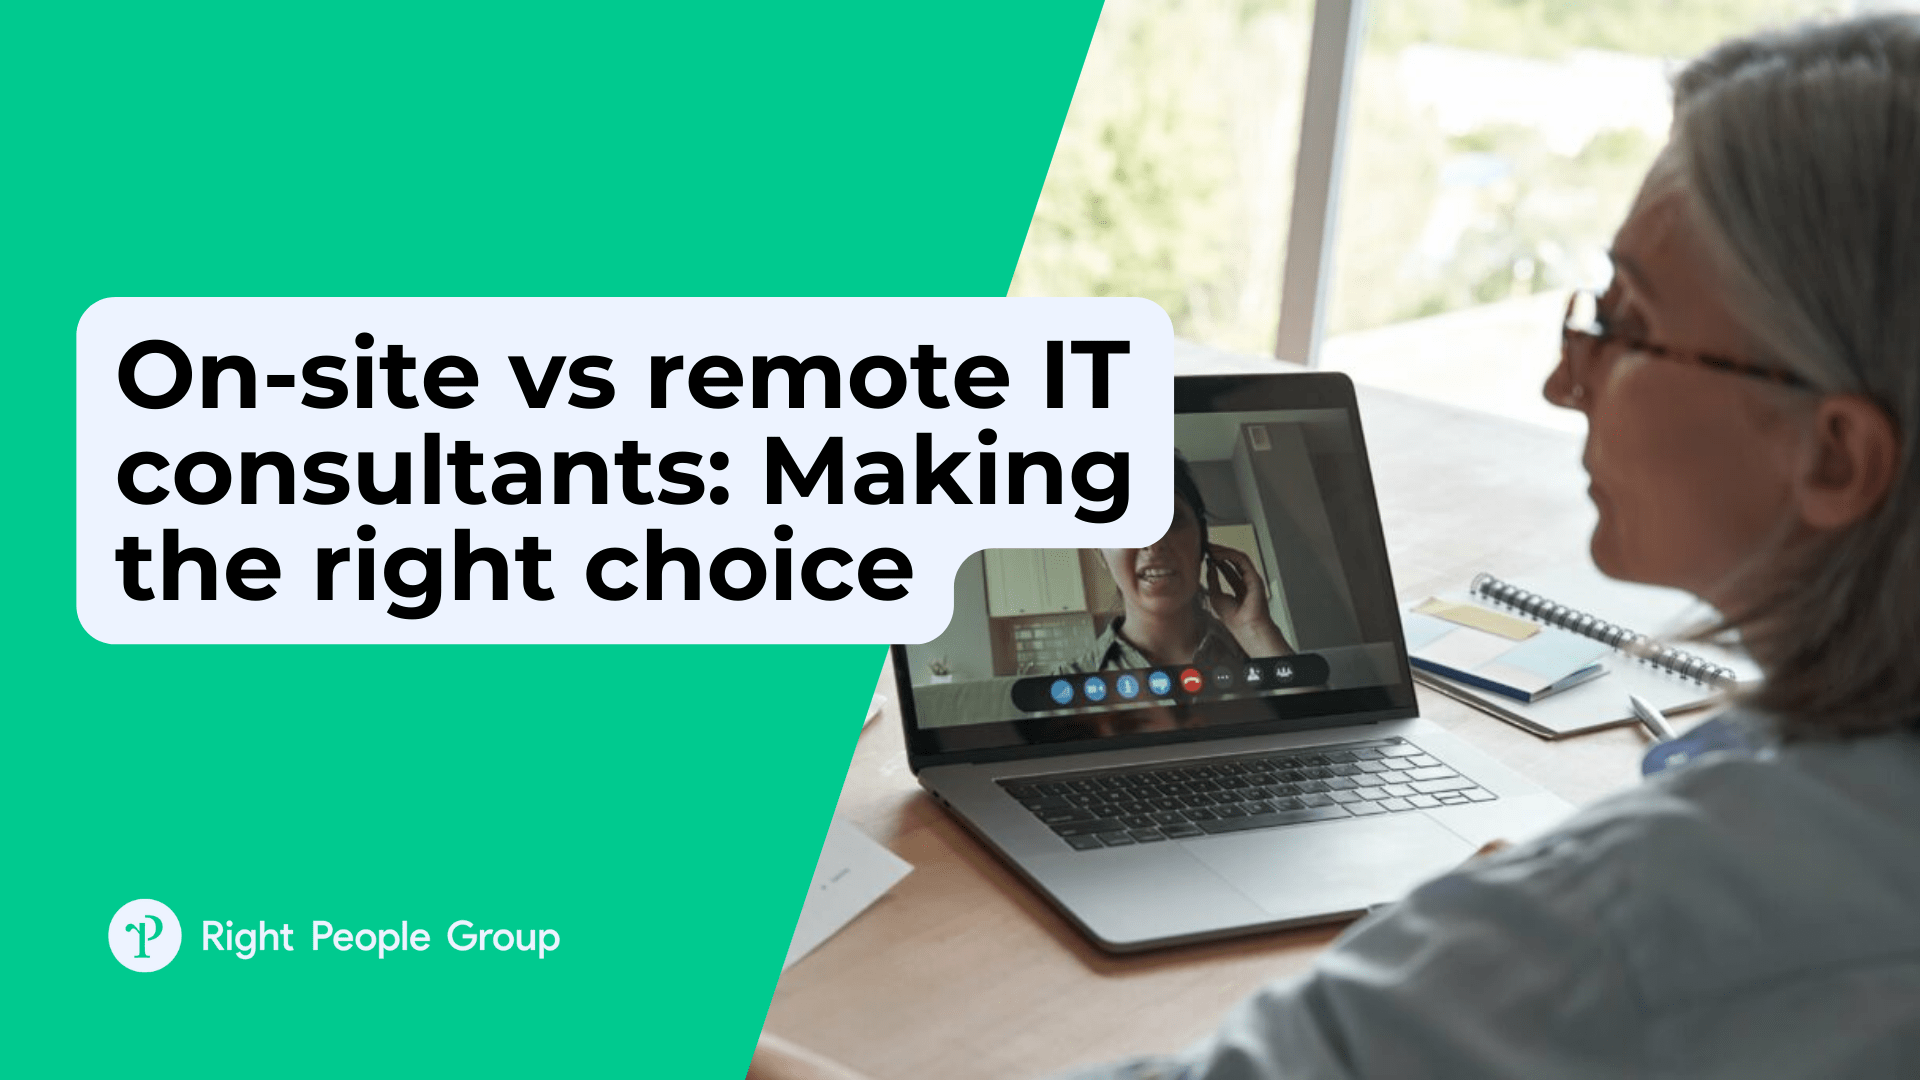 On-site vs remote IT consultants: Making the right choice